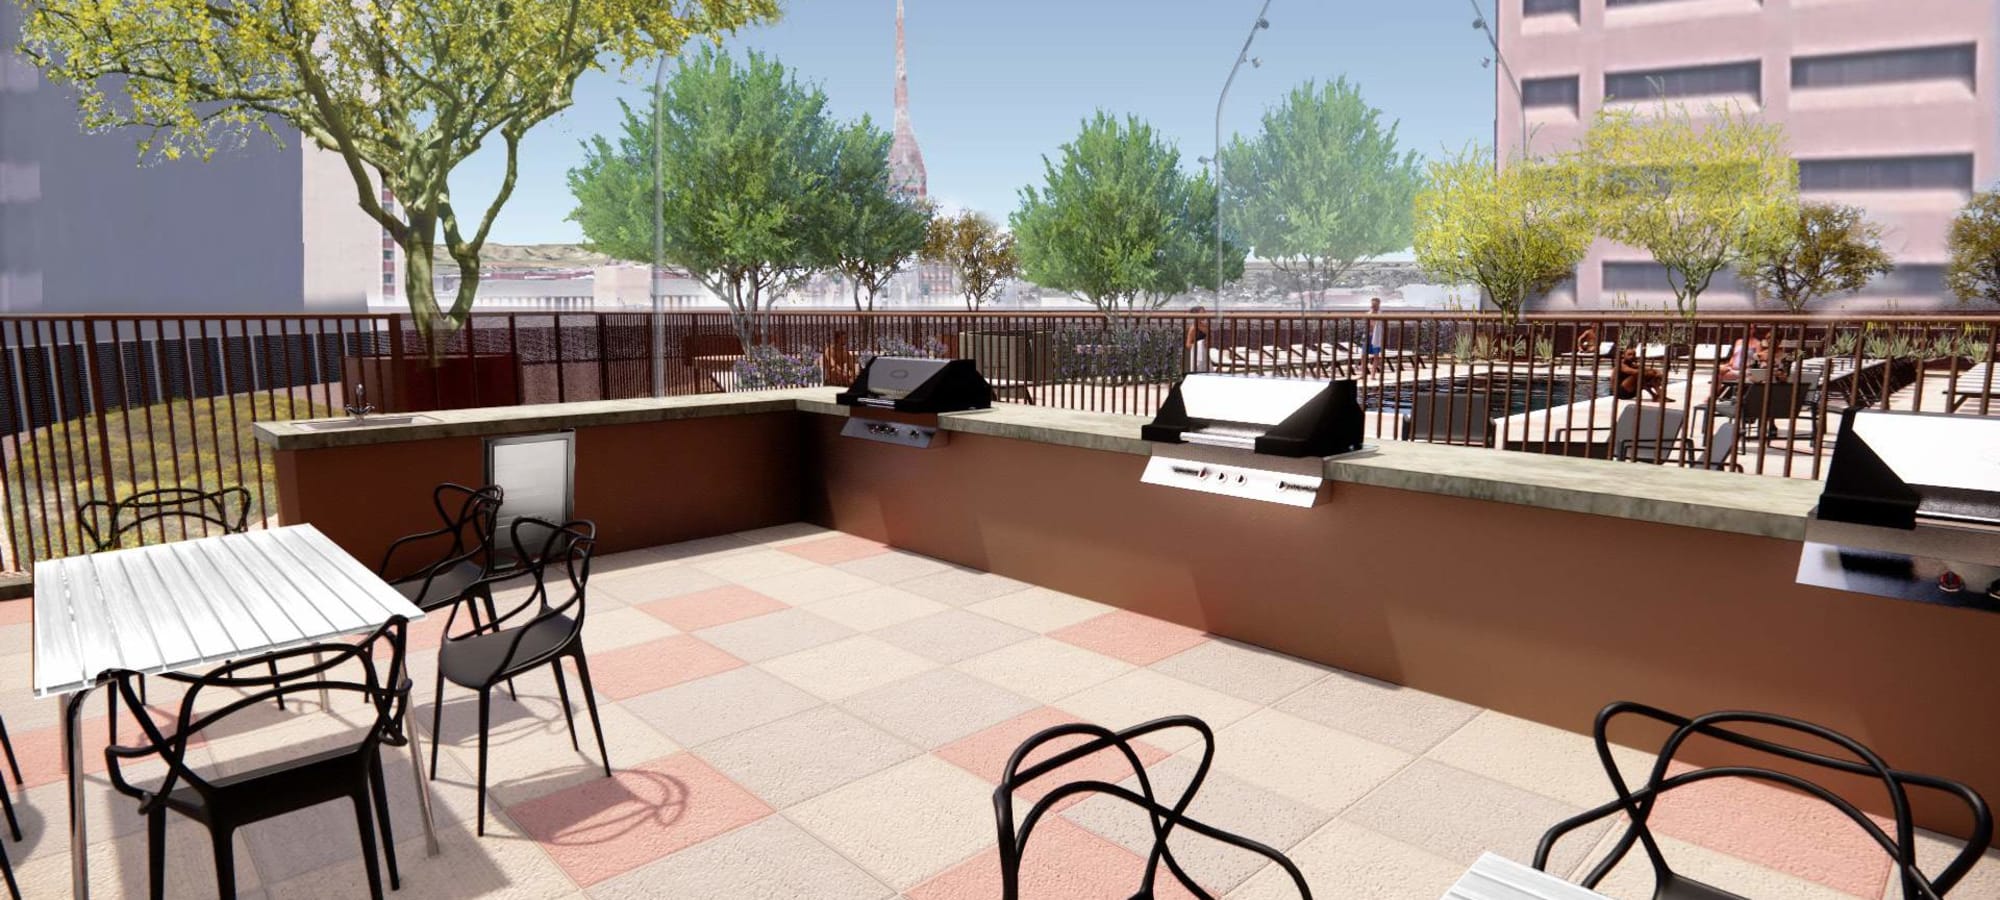 Render of our grill stations at PALMtower in Phoenix, Arizona